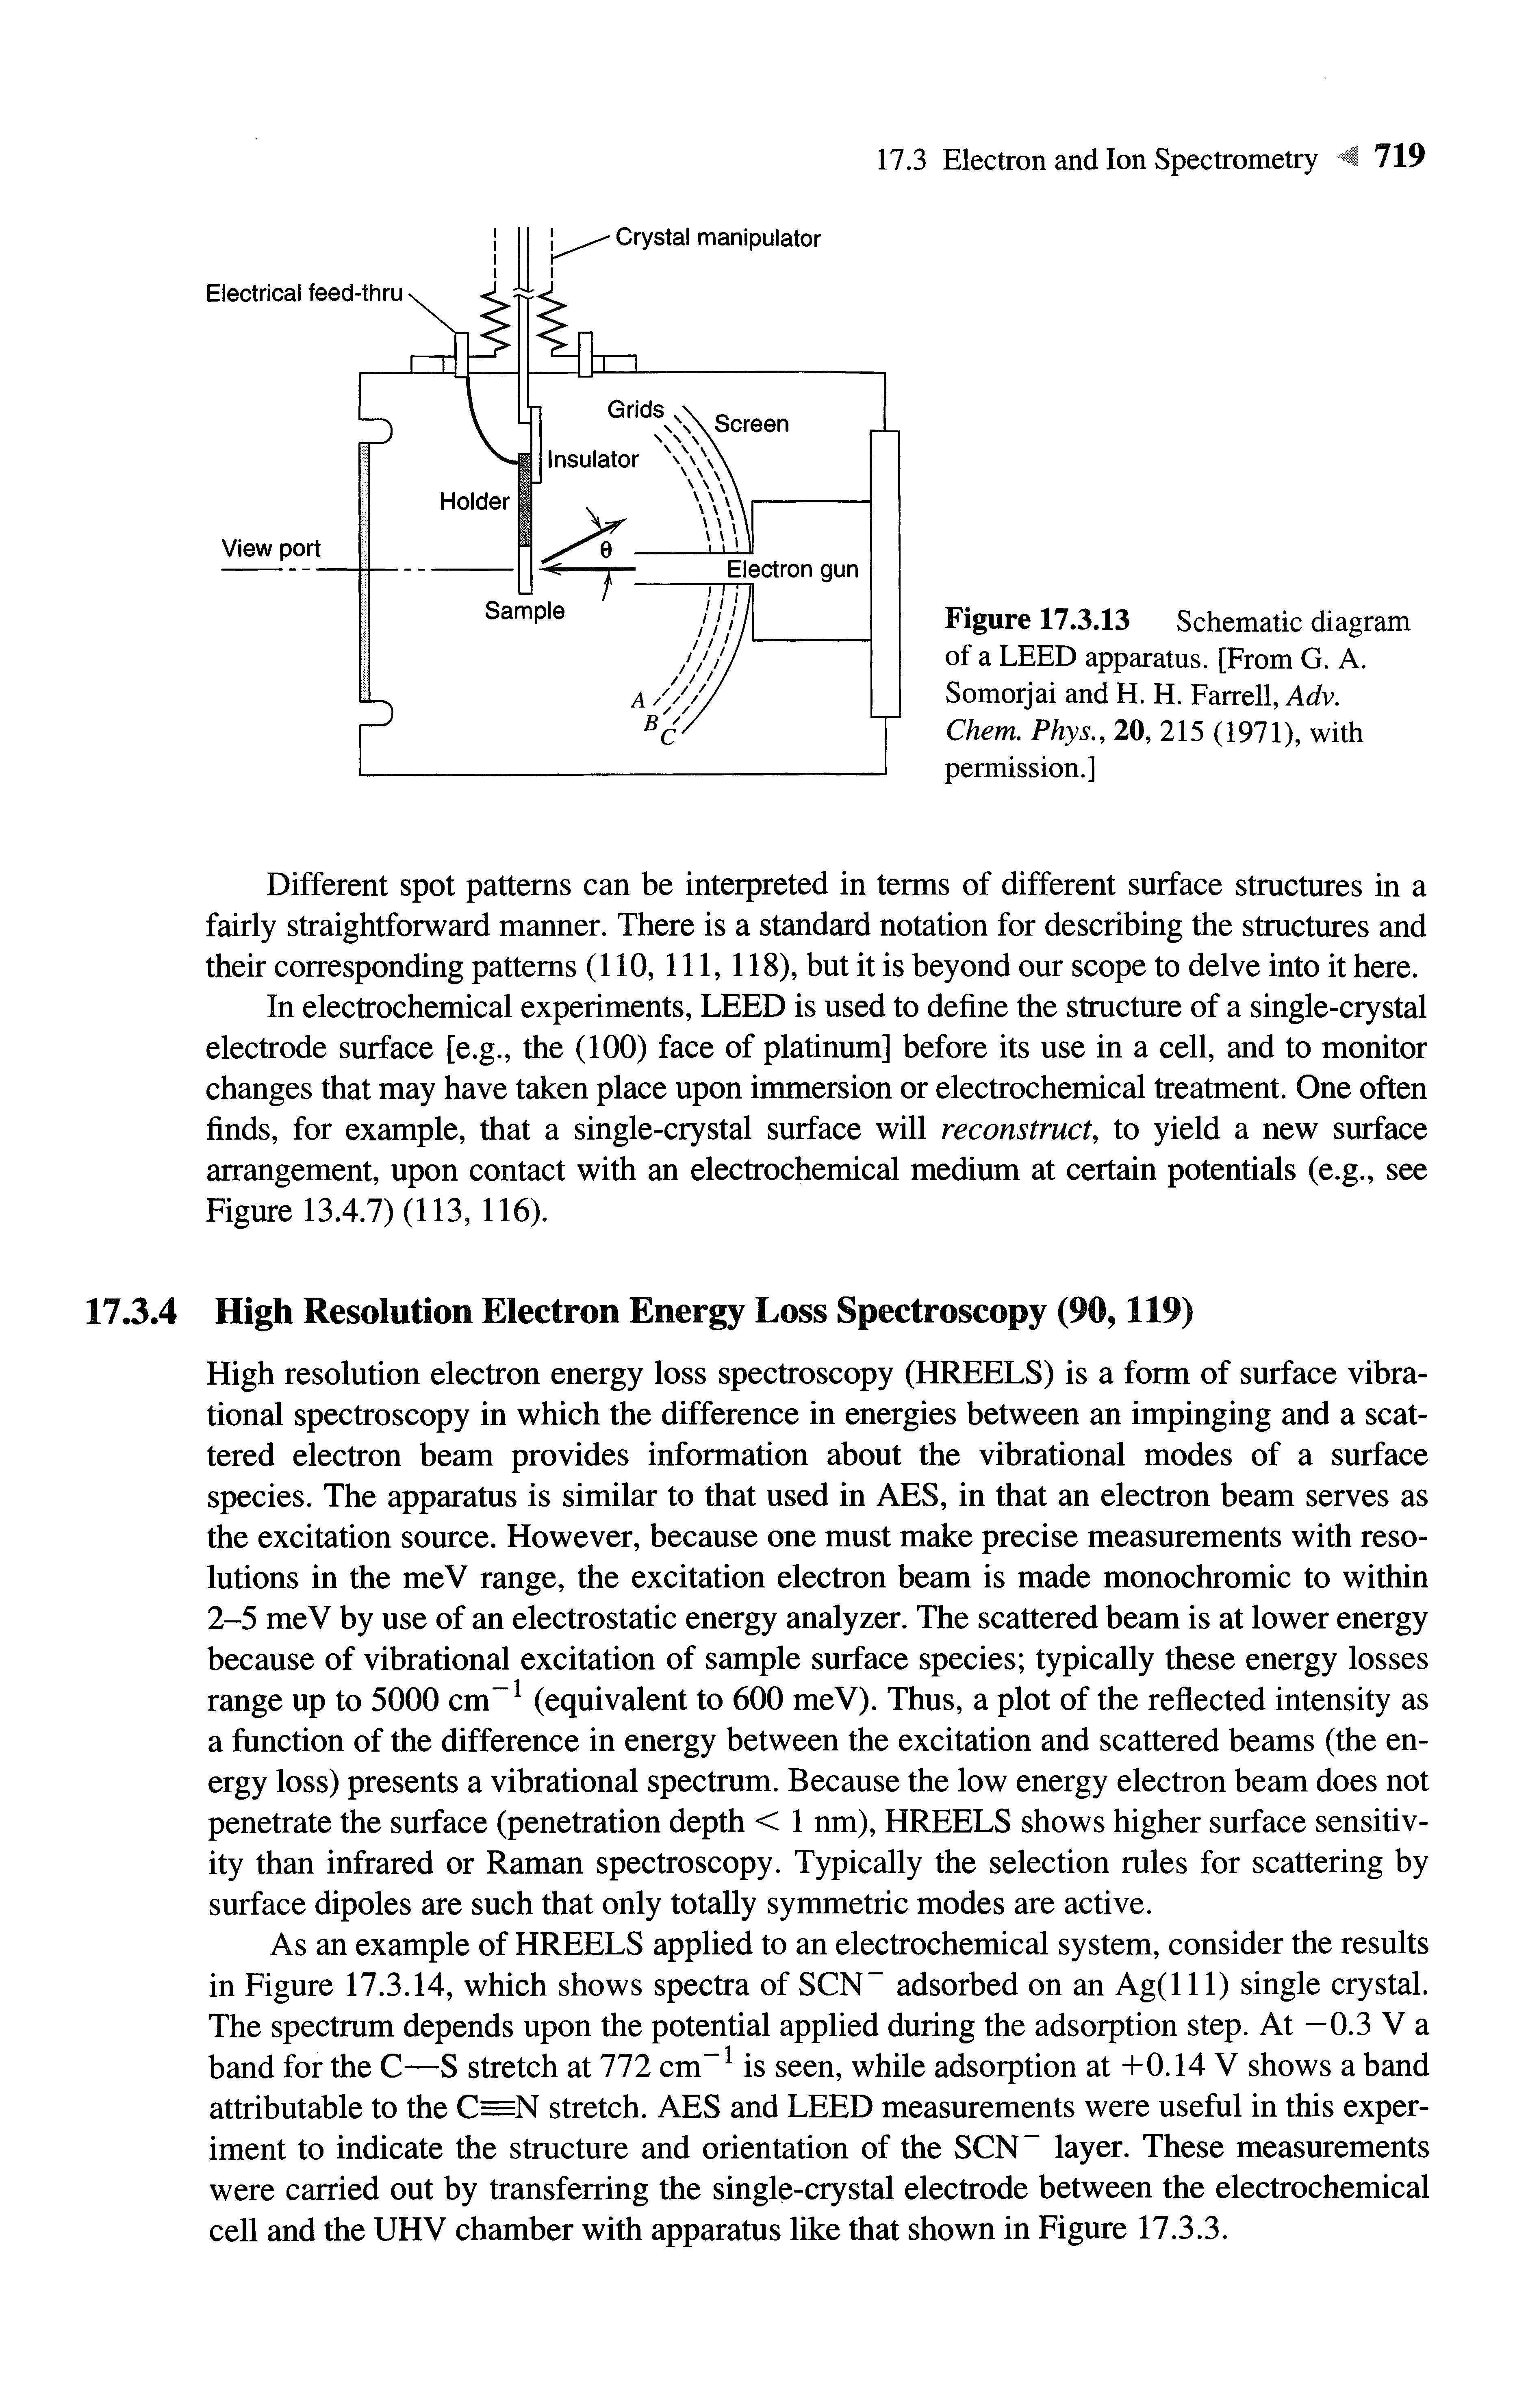 Figure 17.3.13 Schematic diagram of a LEED apparatus. [From G. A. Somorjai and H. H. Farrell, Adv. Chem. Phys., 20, 215 (1971), with permission.]...